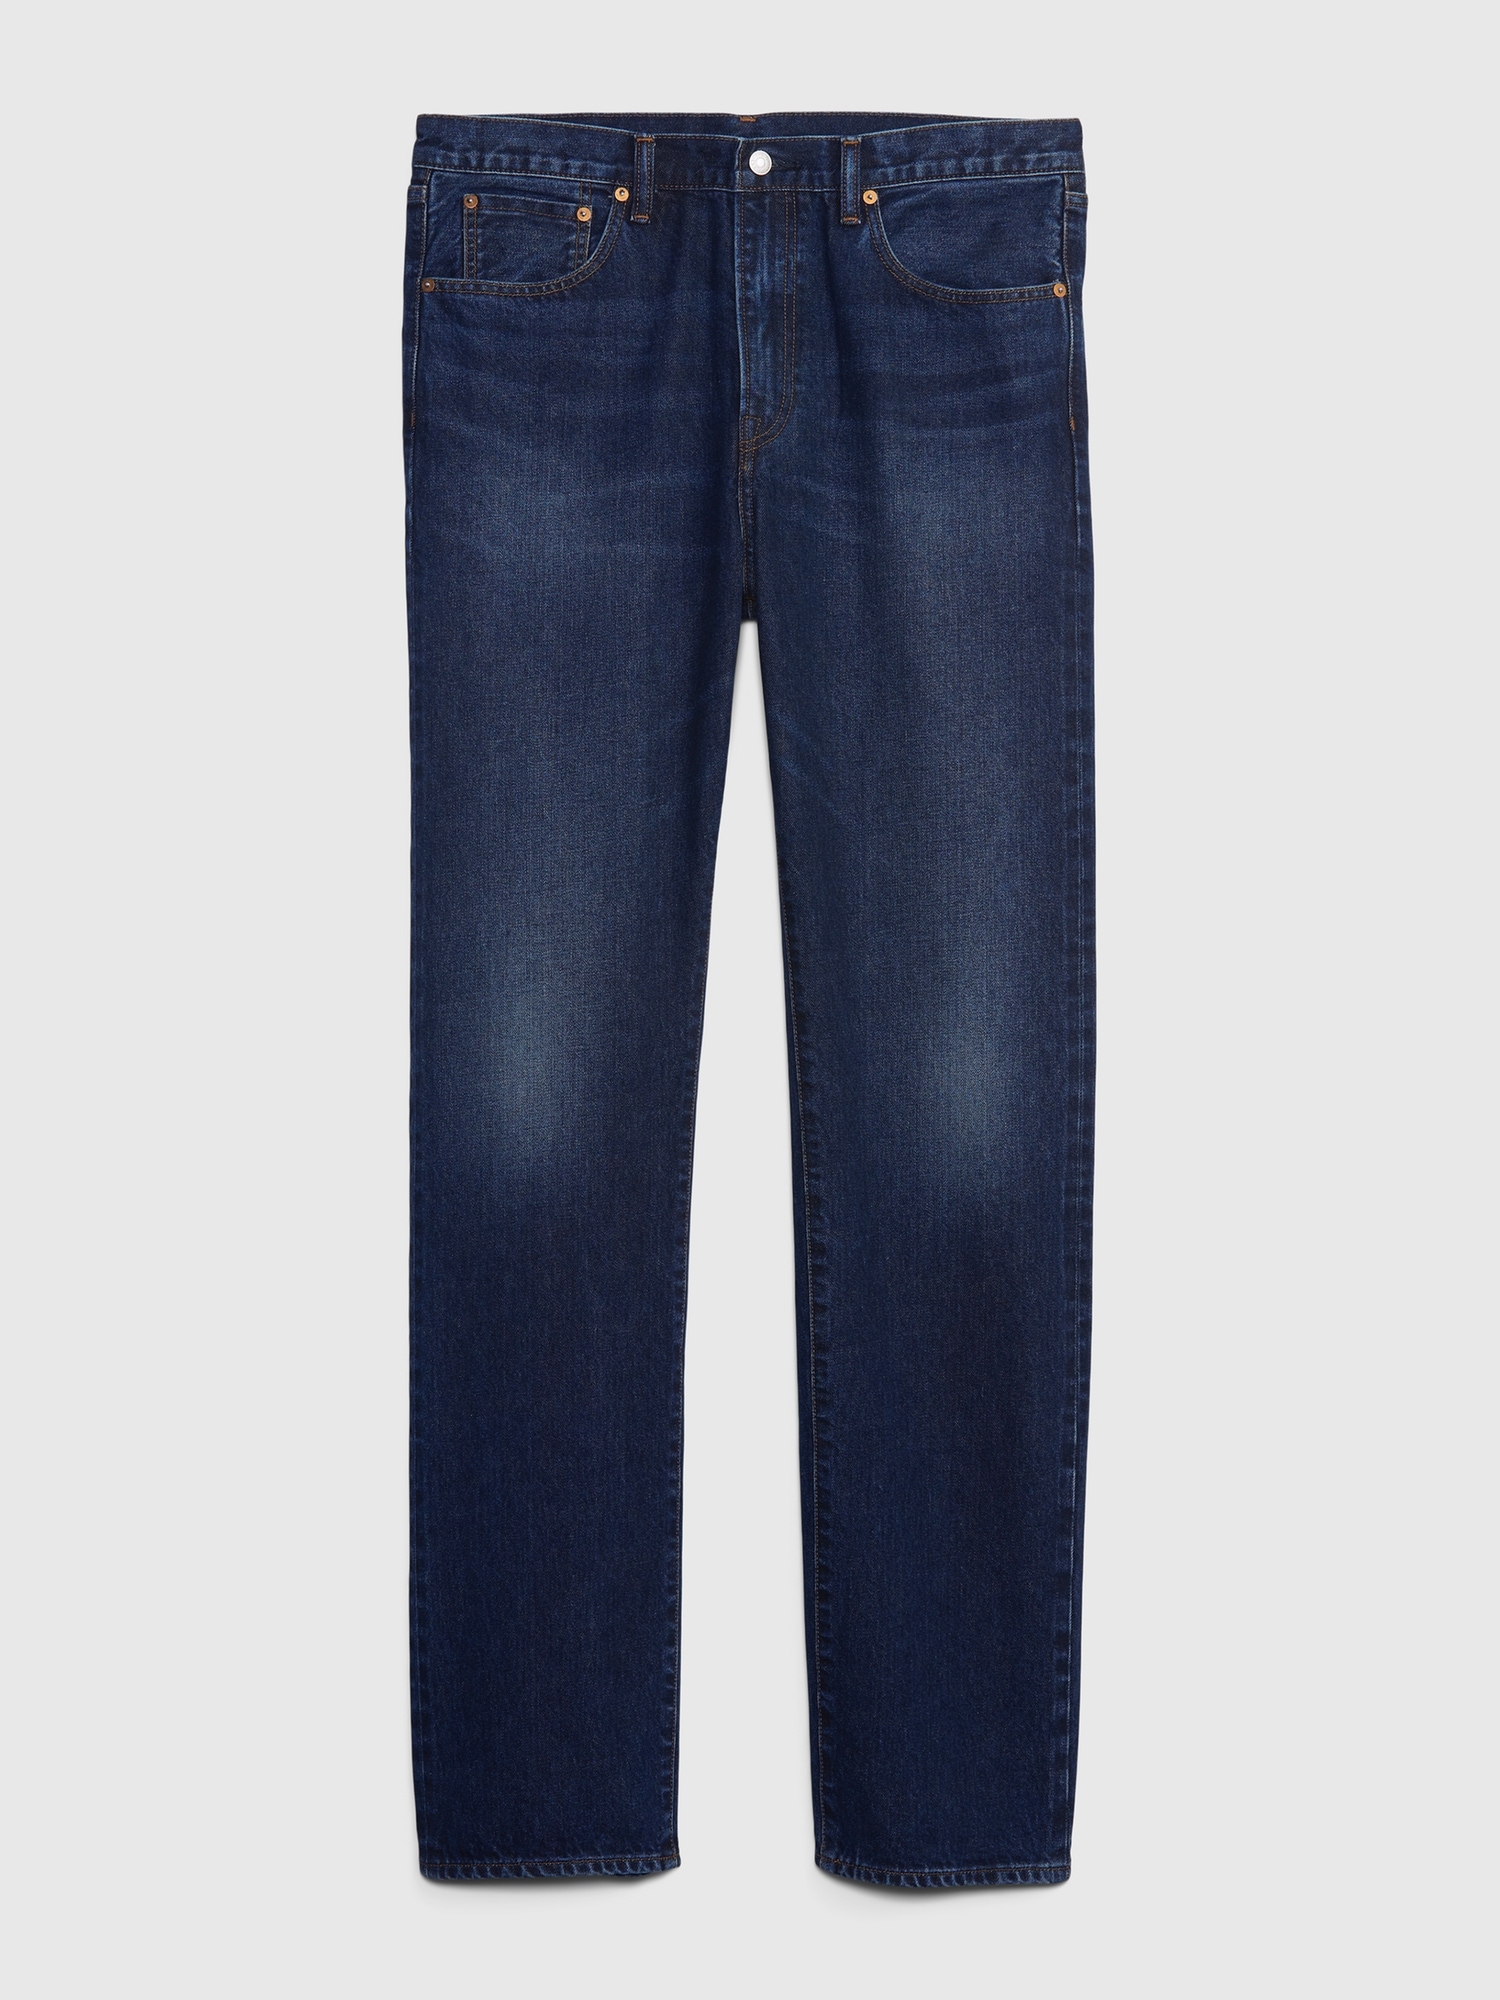 Buy Indigo Jeans for Men by GUESS Online